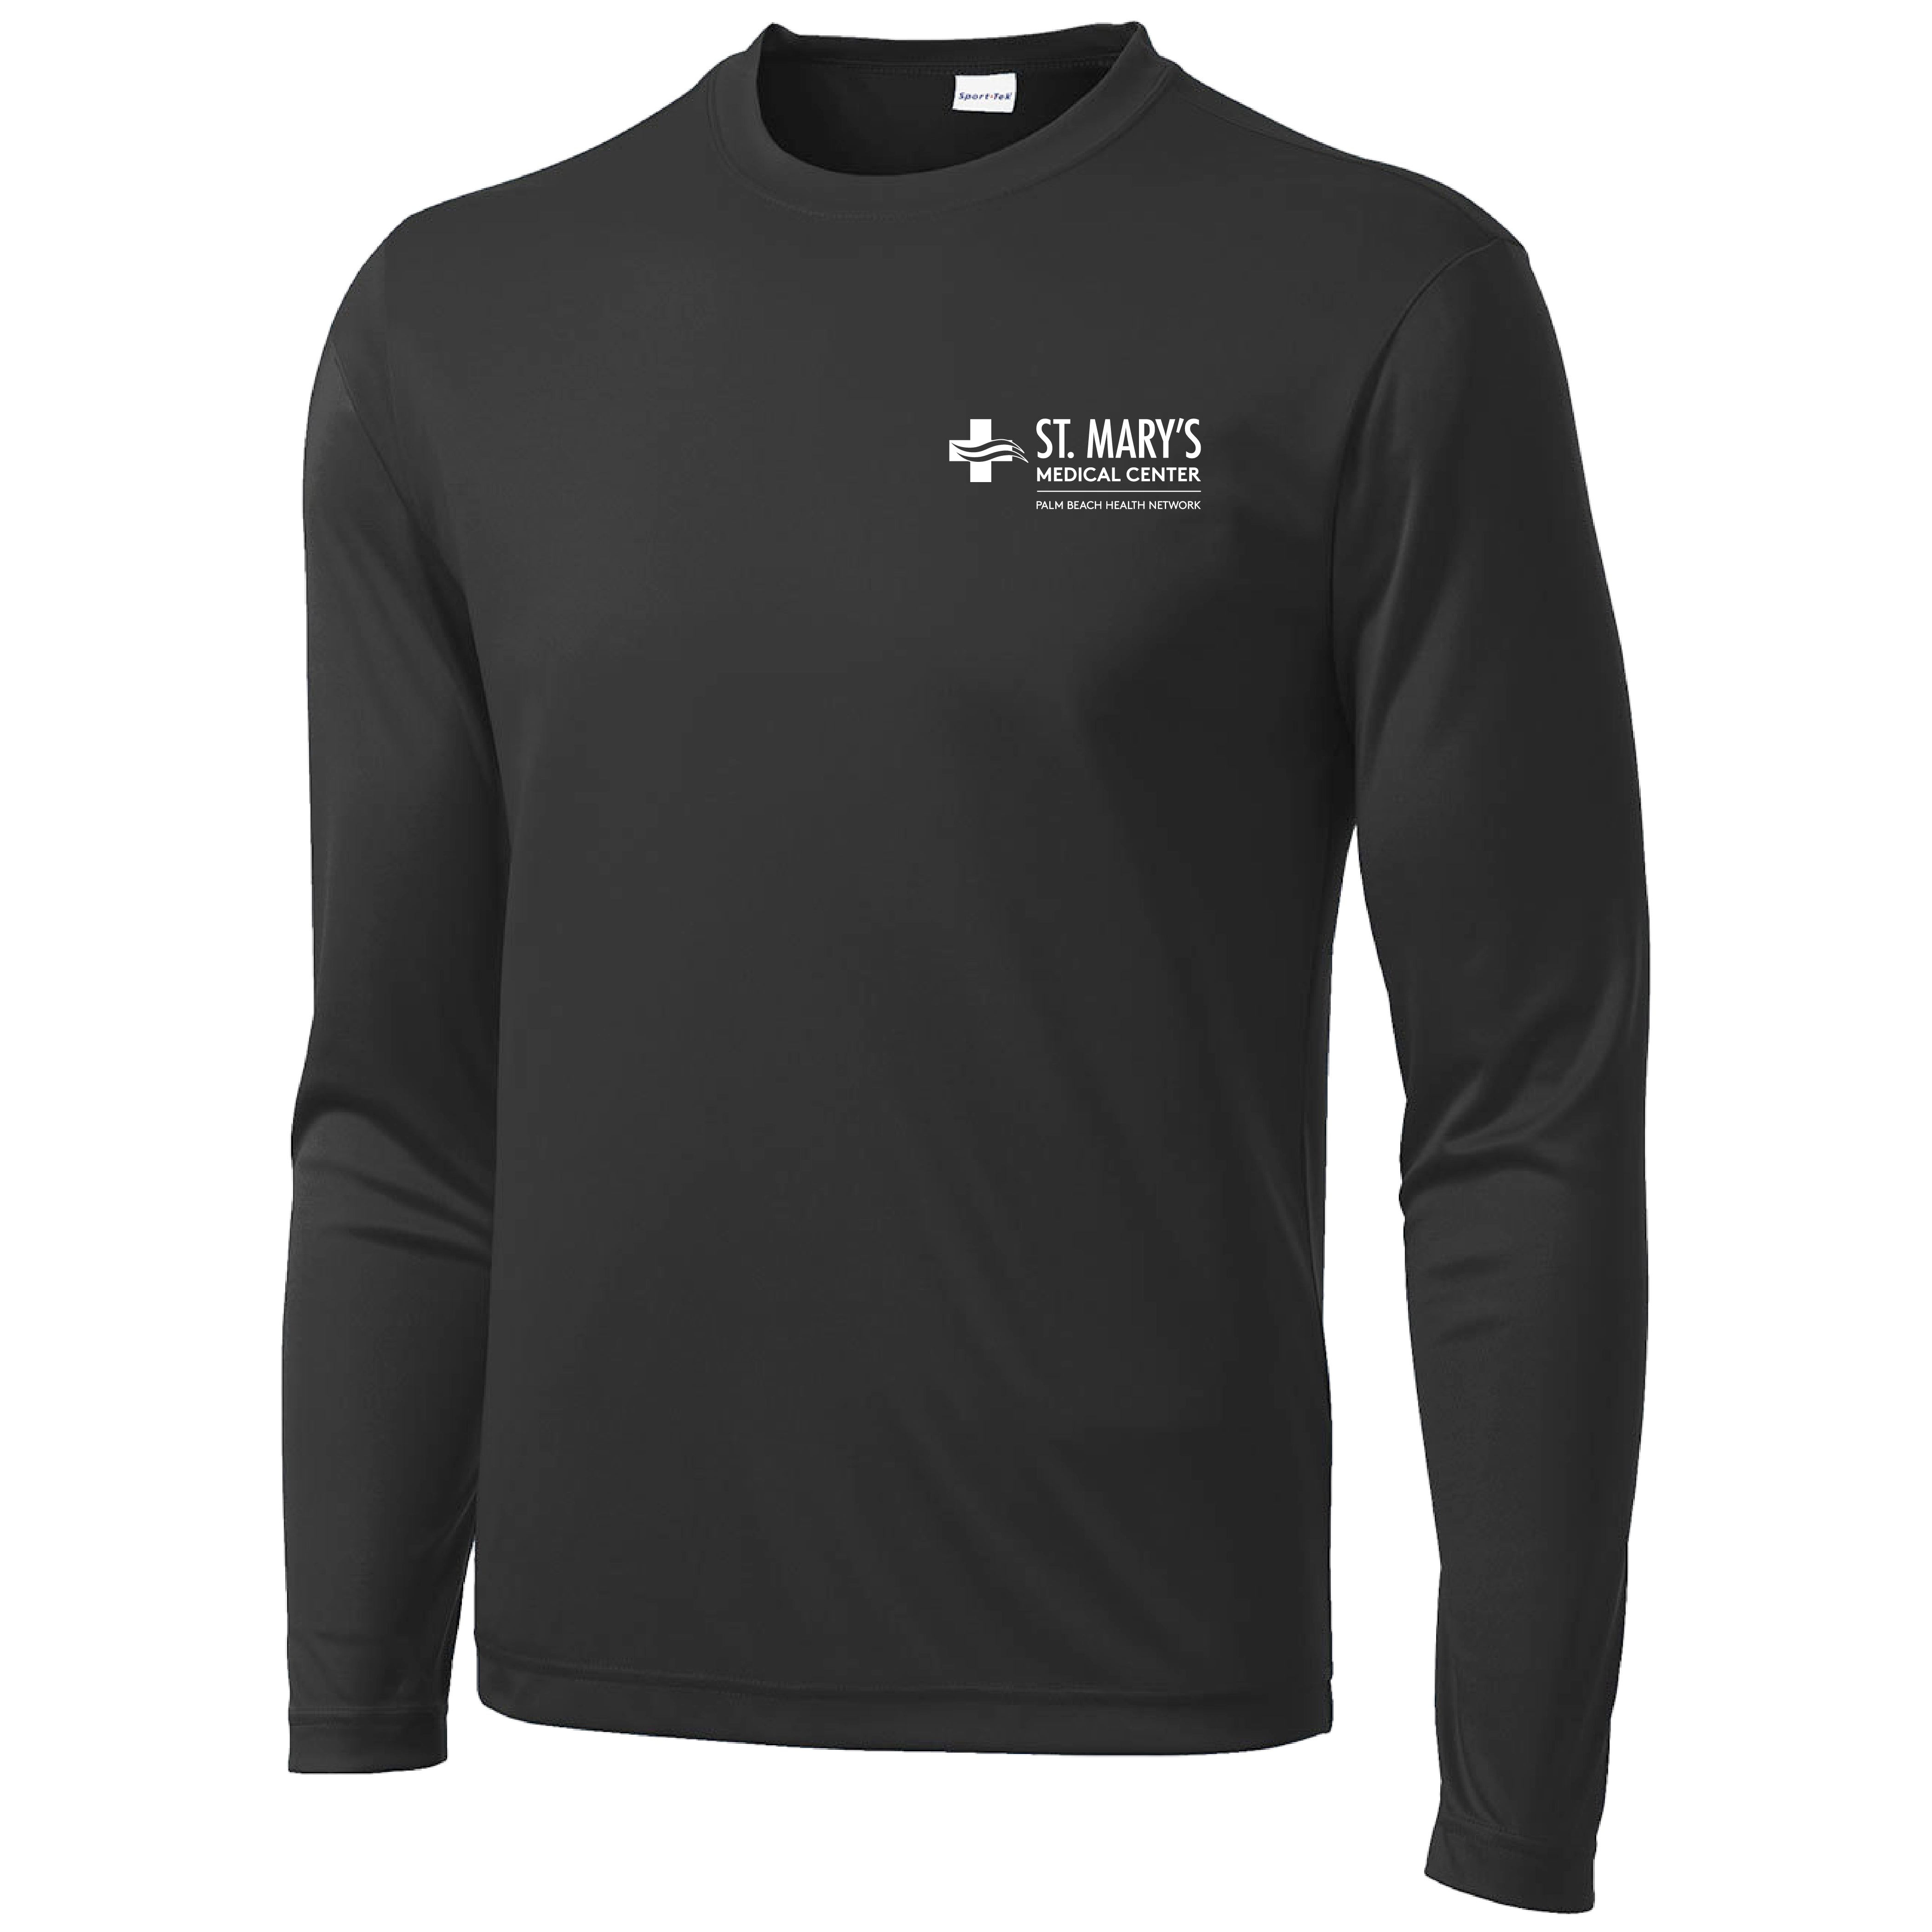 St. Mary's Hospital - Clean Hands Save Lives PERFORMANCE Long Sleeve